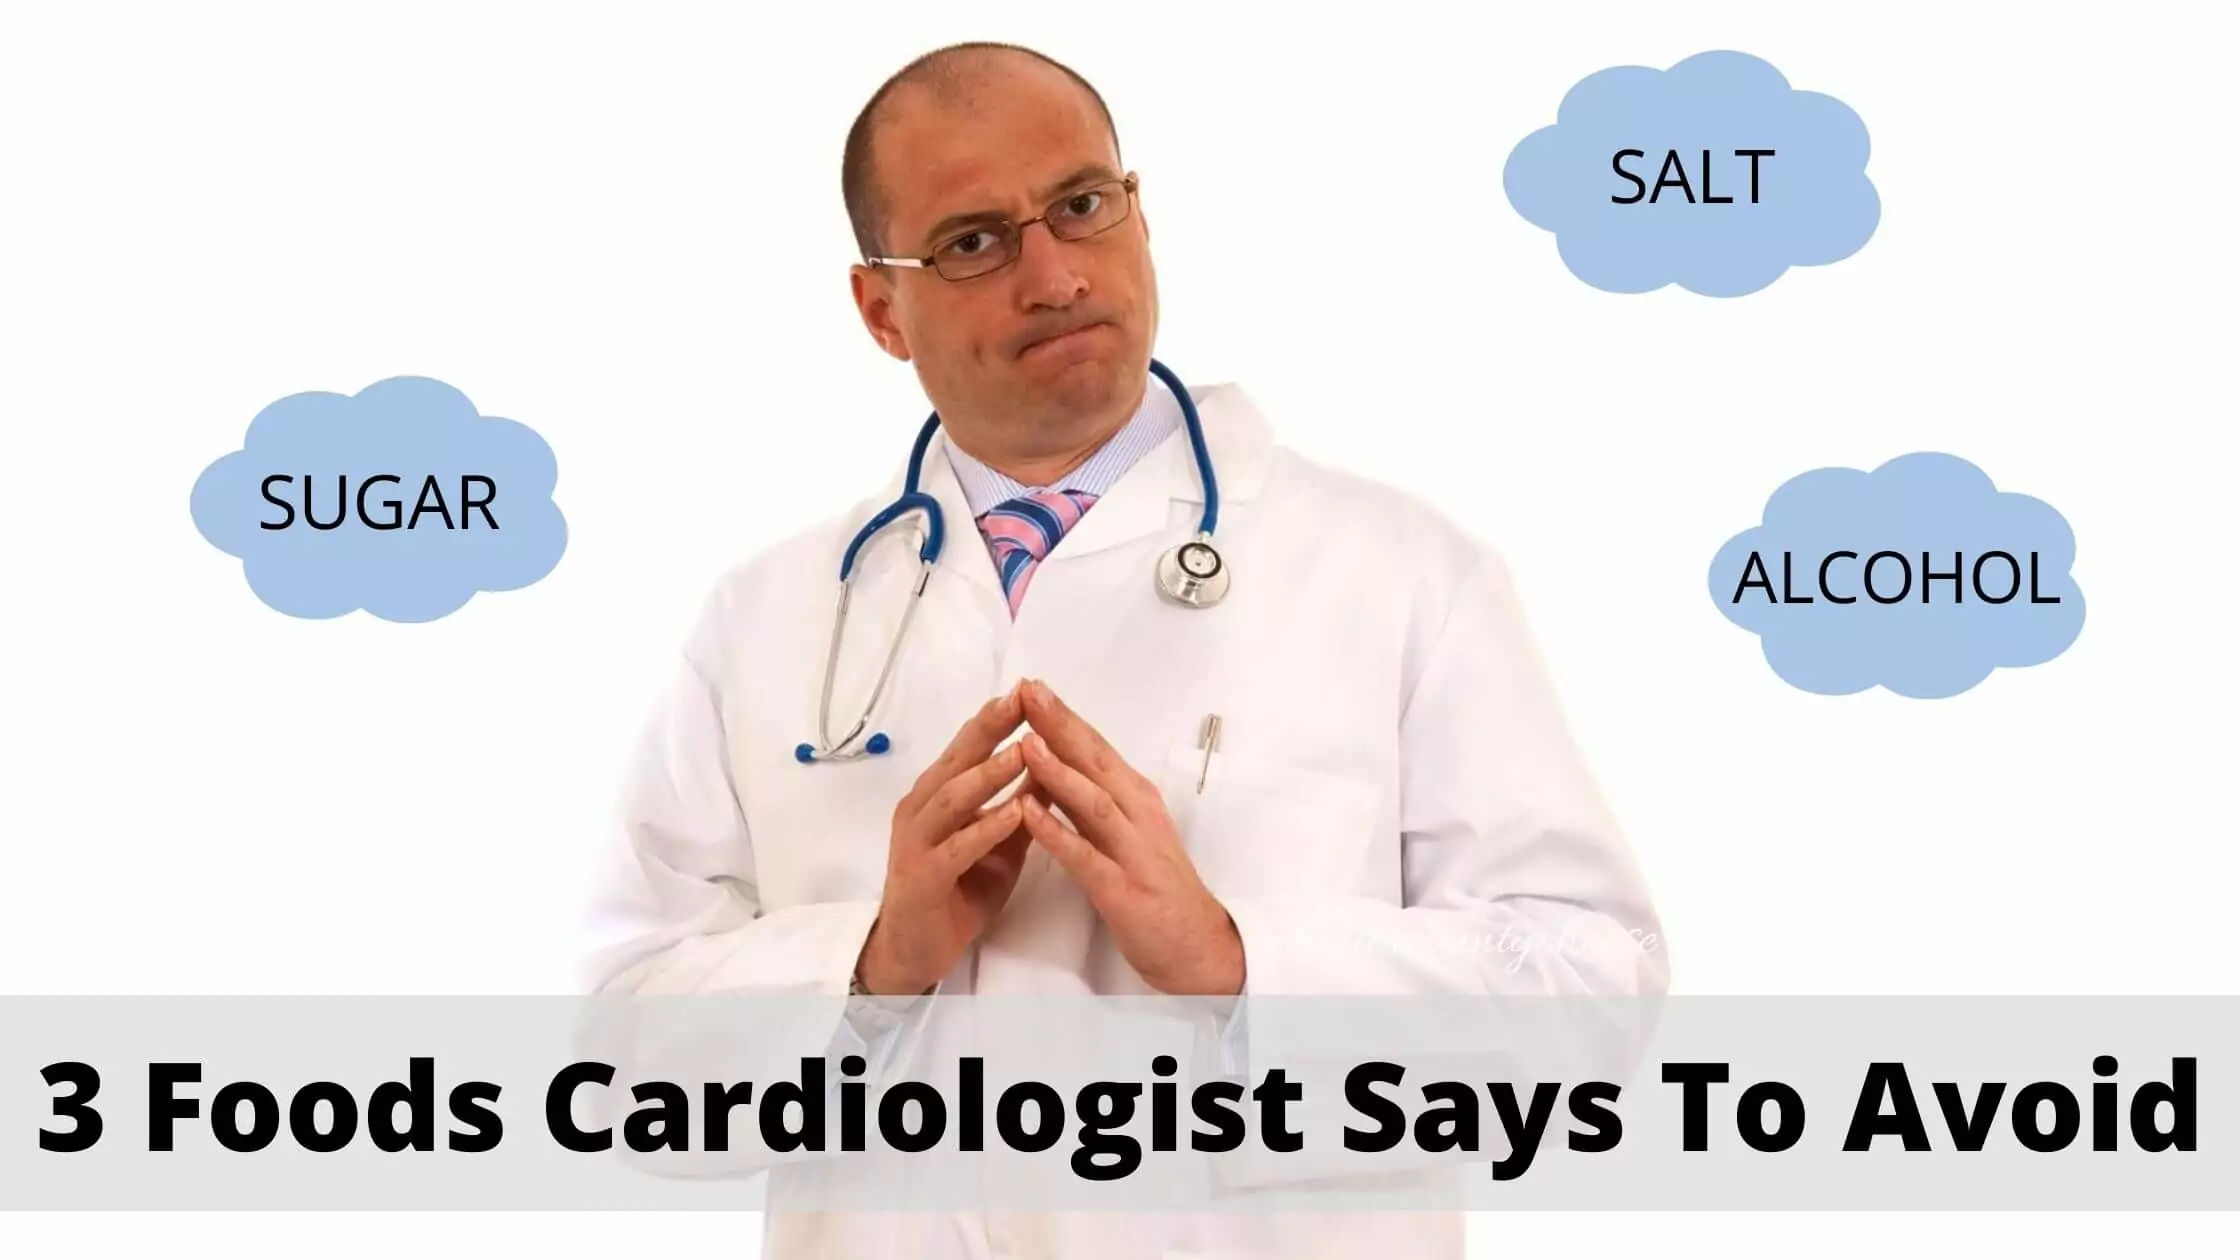 The 3 Foods Cardiologist Says To Avoid